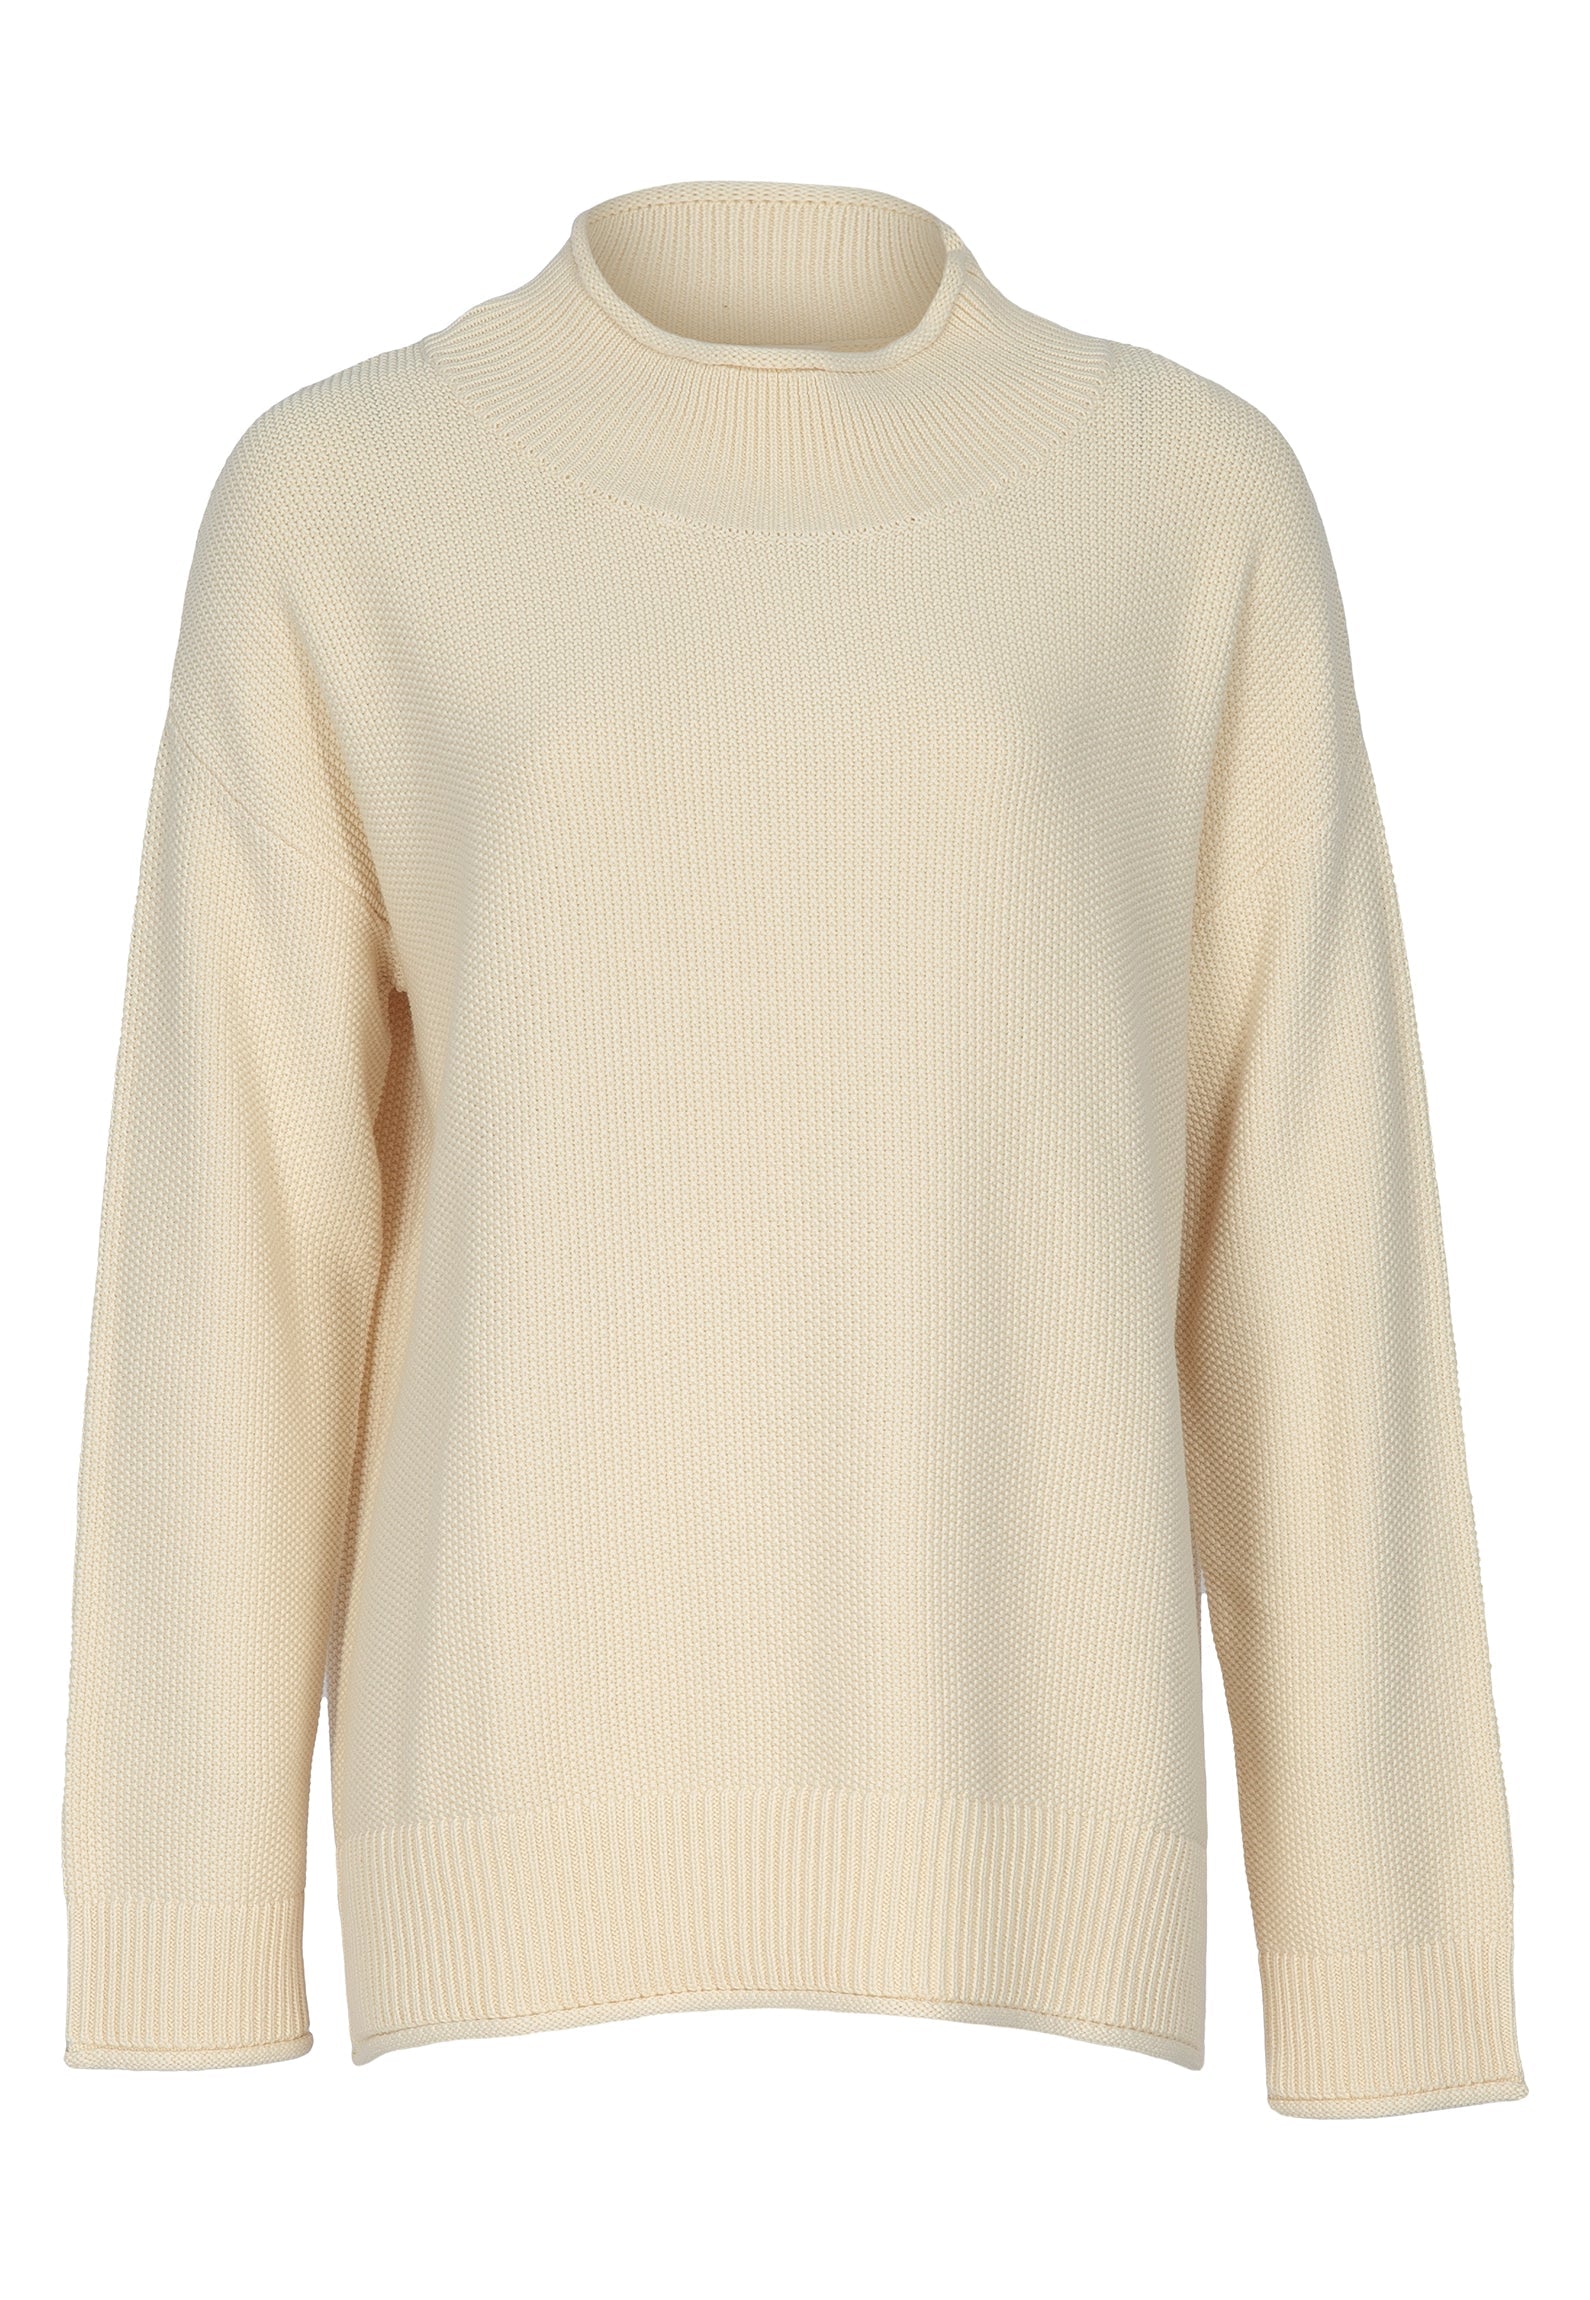 Petra Sweater - Cream-Knitwear & Jumpers-By RIDLEY-The Bay Room